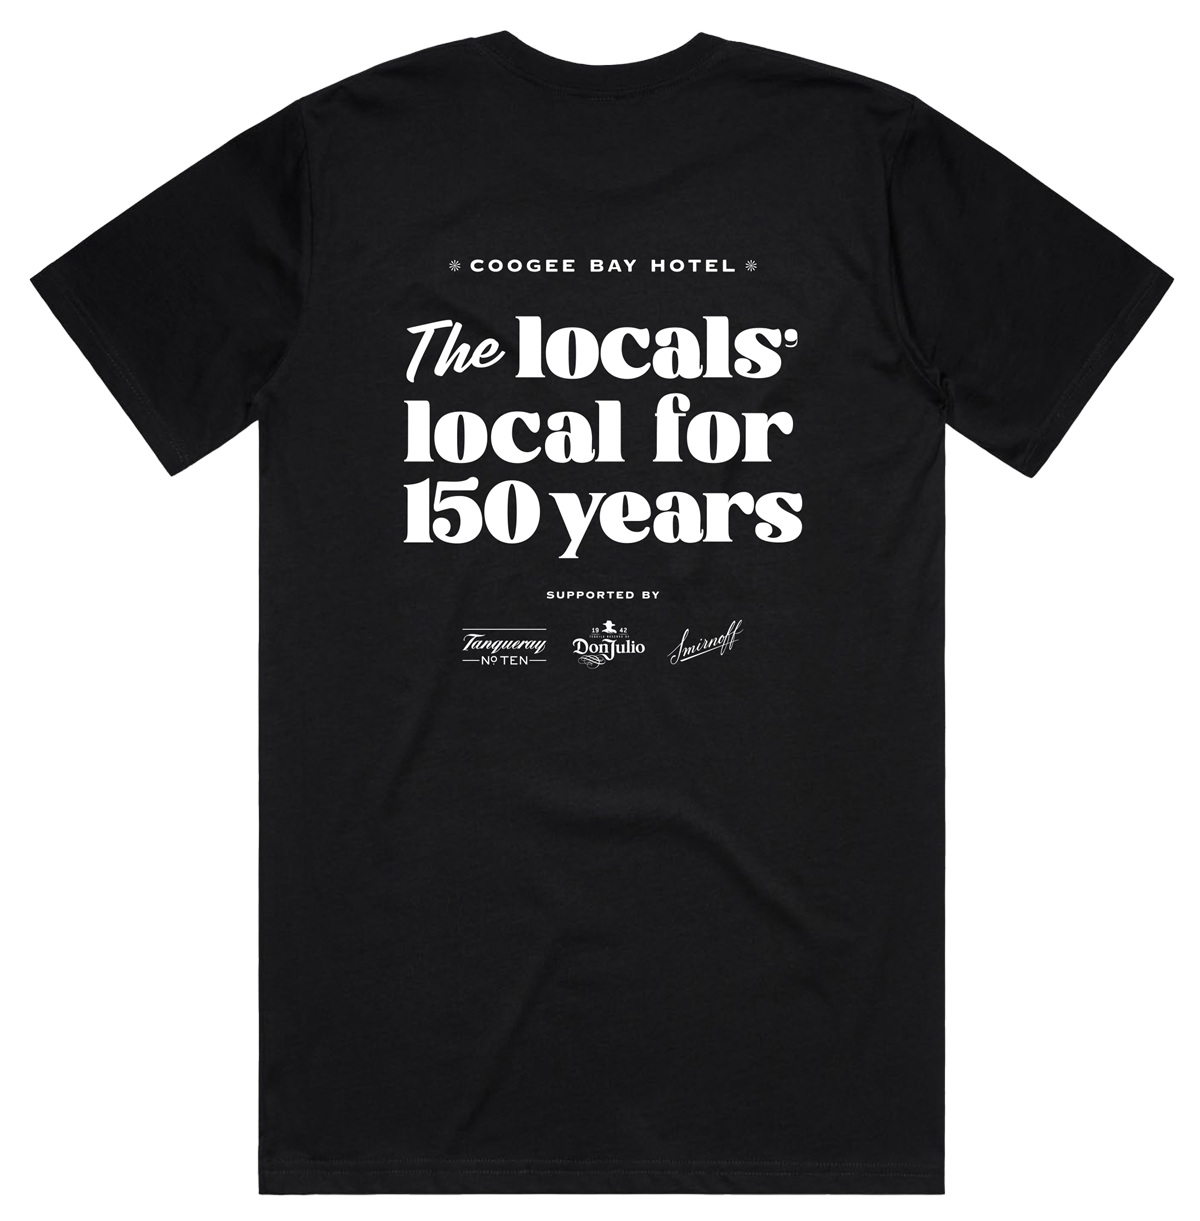 Coogee Bay Hotel The Locals' Local For 150 Years Limited Edition Tee